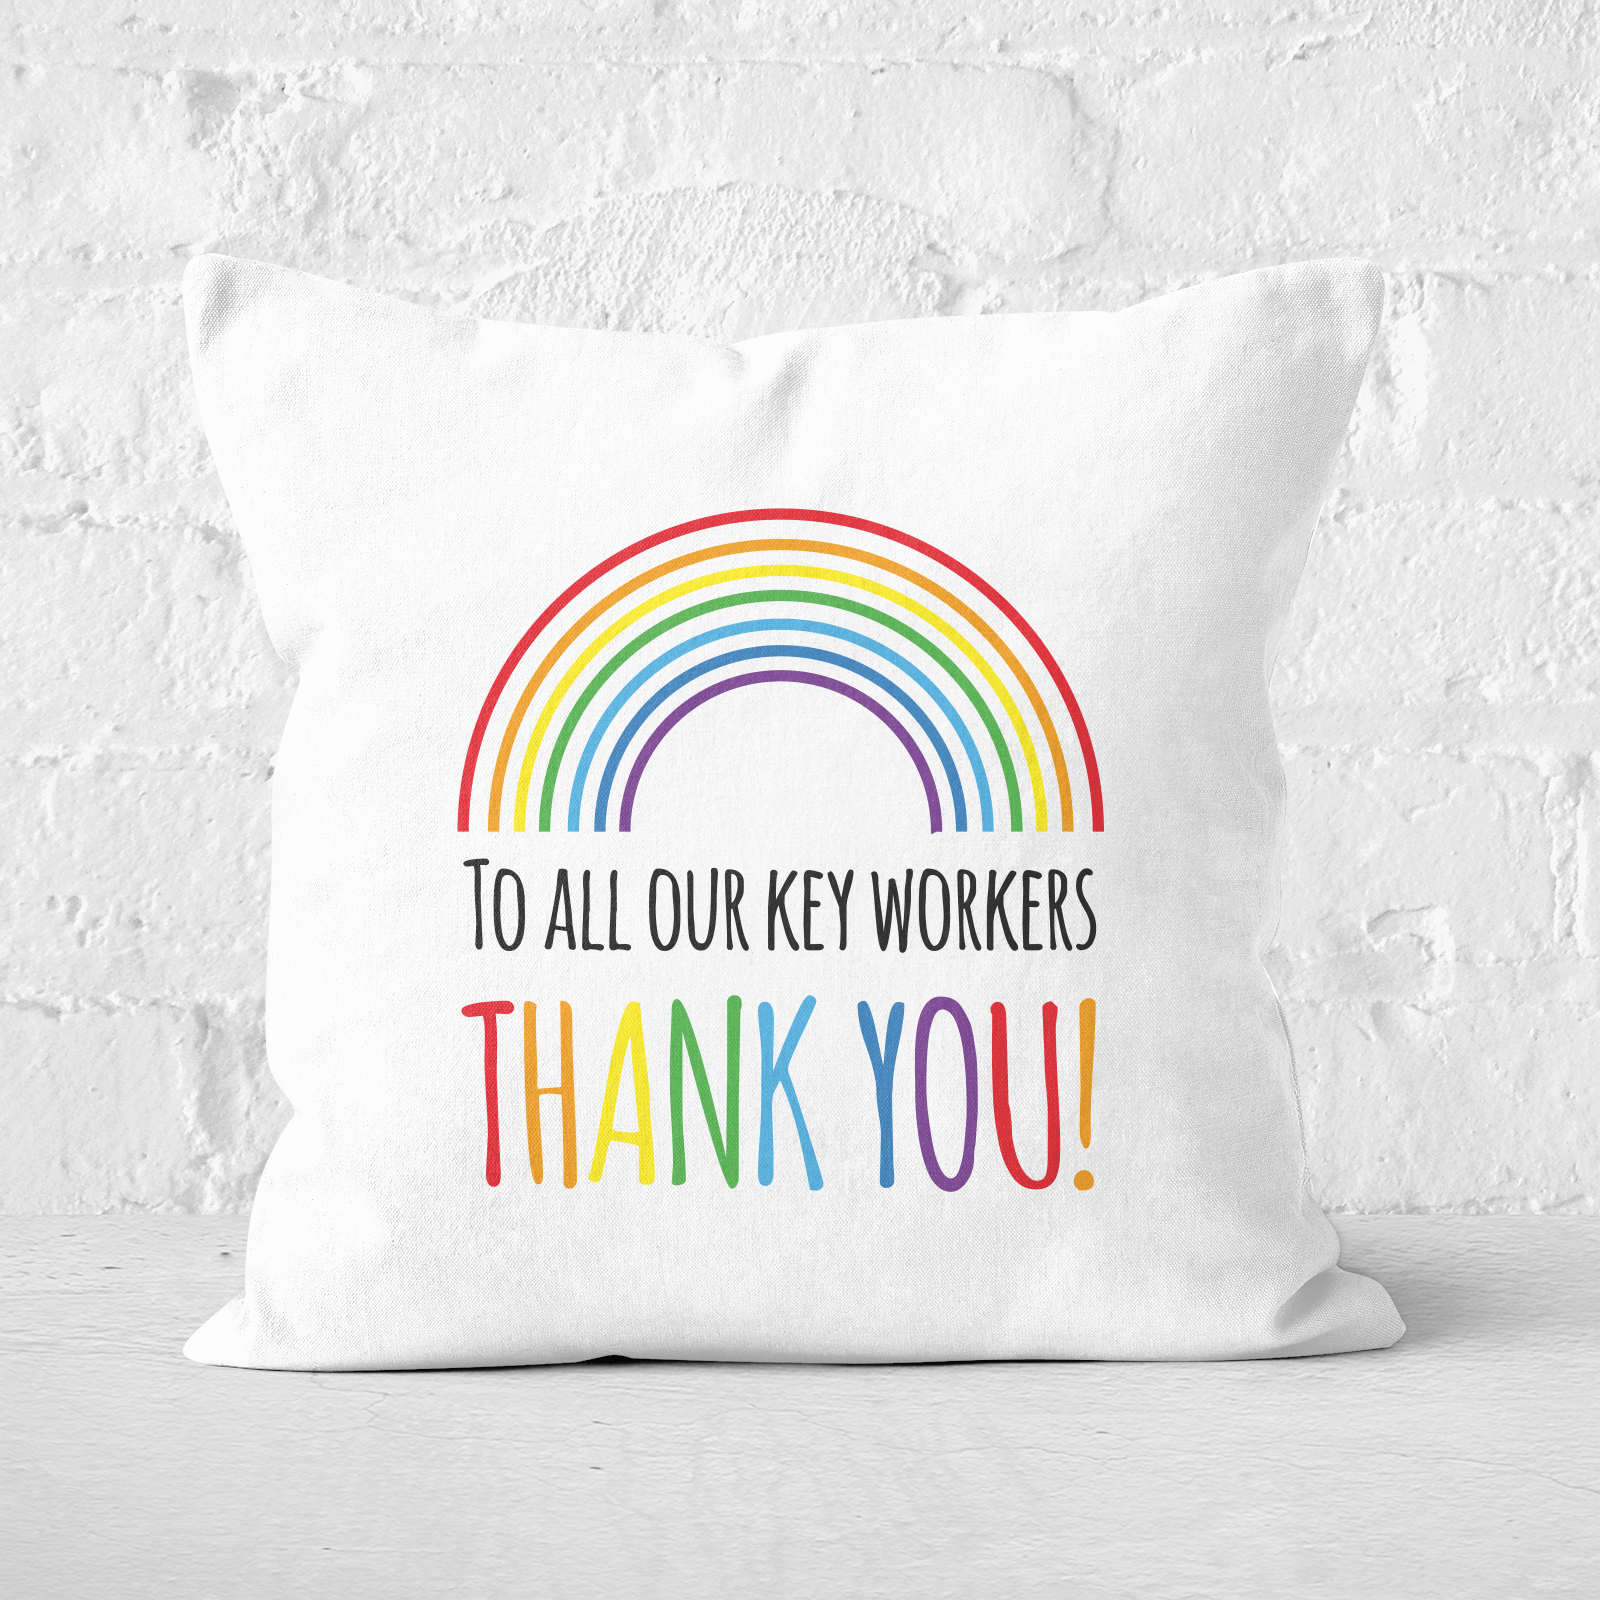 To All Our Key Workers Thank You! Square Cushion - 60x60cm - Soft Touch